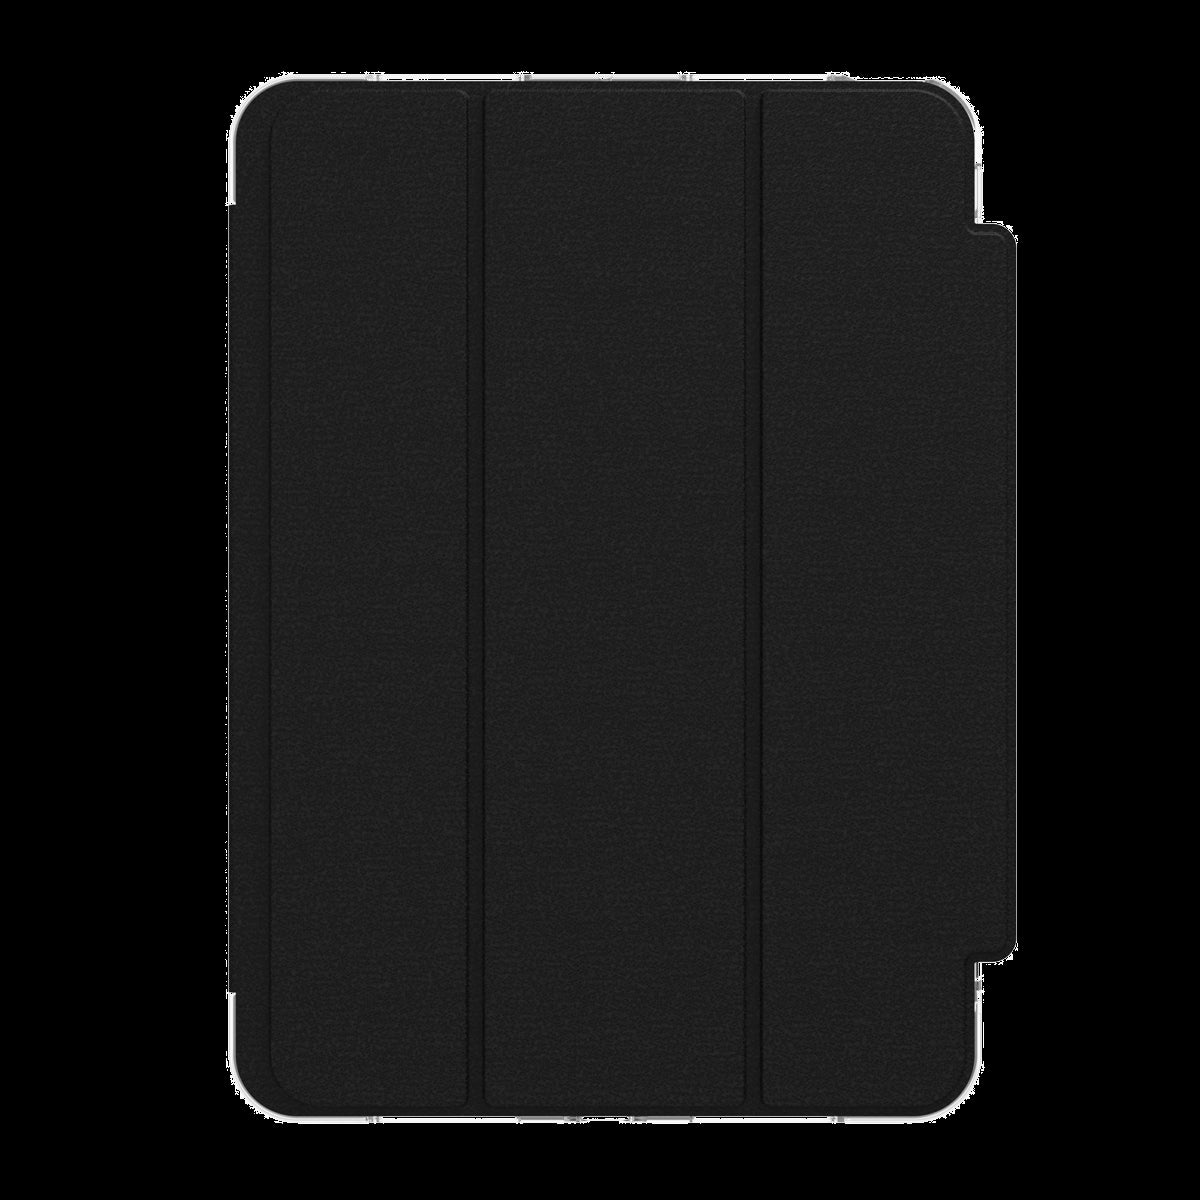 The ZAGG Crystal Palace Folio case for tablets provides 6.5ft of drop protection, featuring a built-in folio cover that protects the screen and converts into a stand.